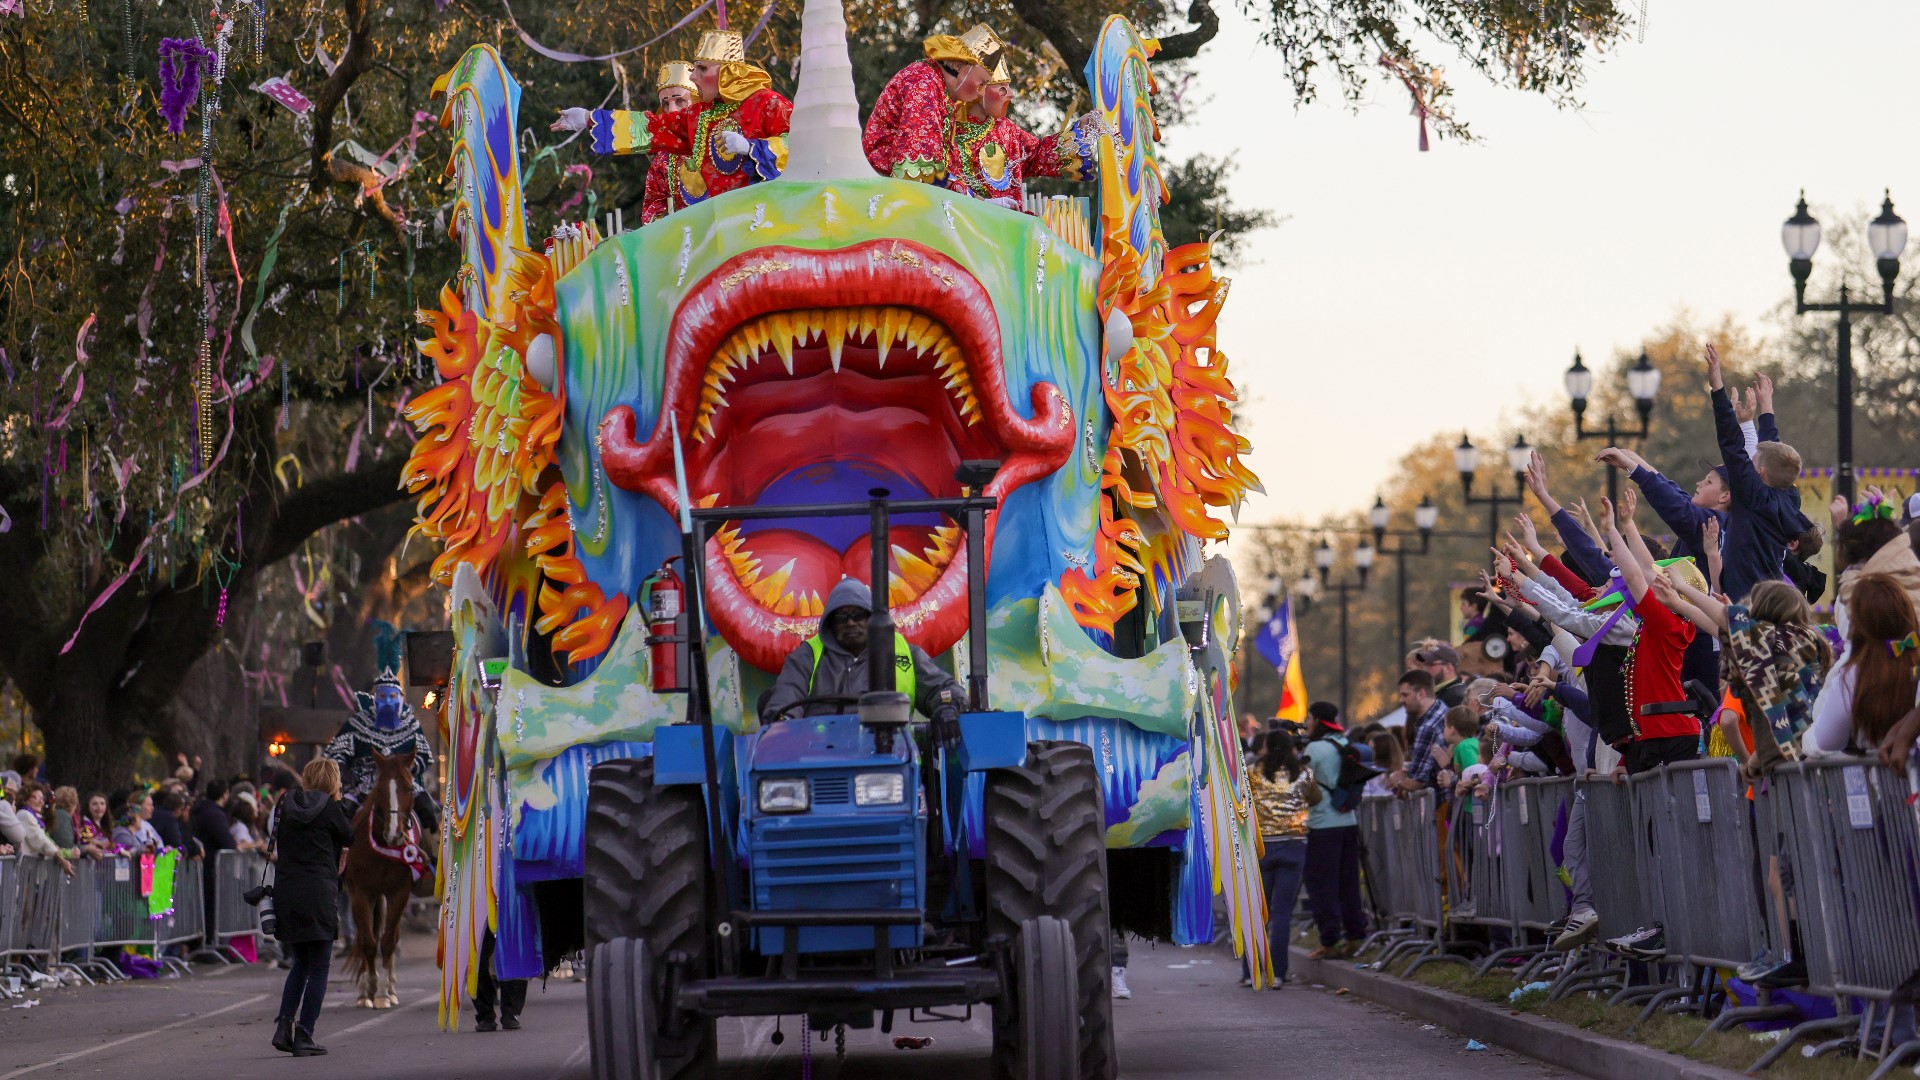 Mardi Gras road restrictions and closures